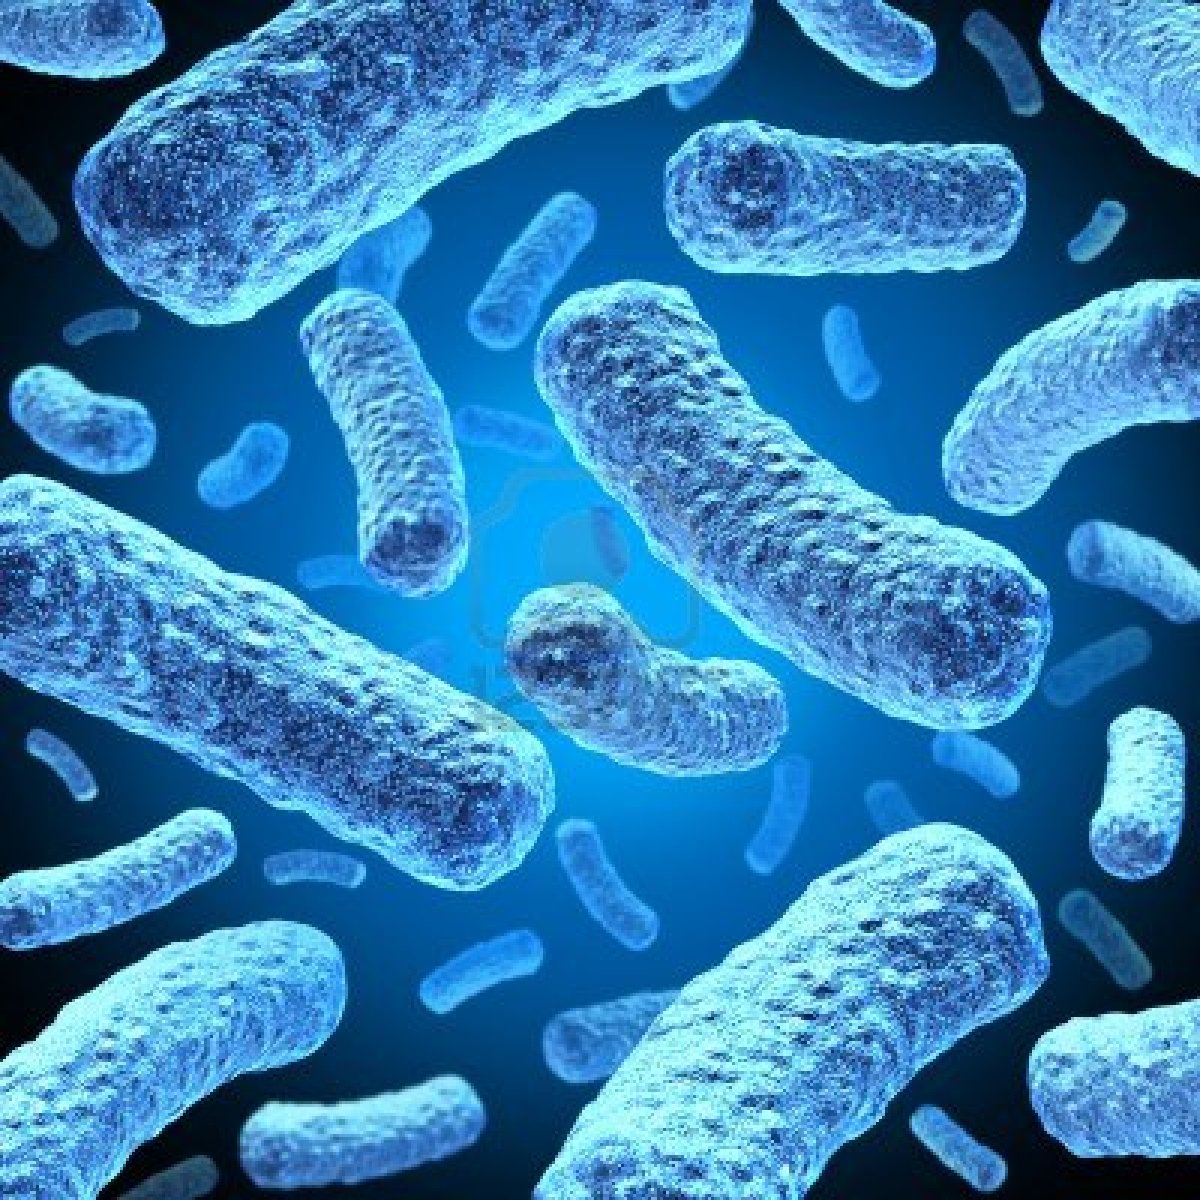 12668156-bacteria-and-bacterium-cells-floating-in-microscopic-space.jpg